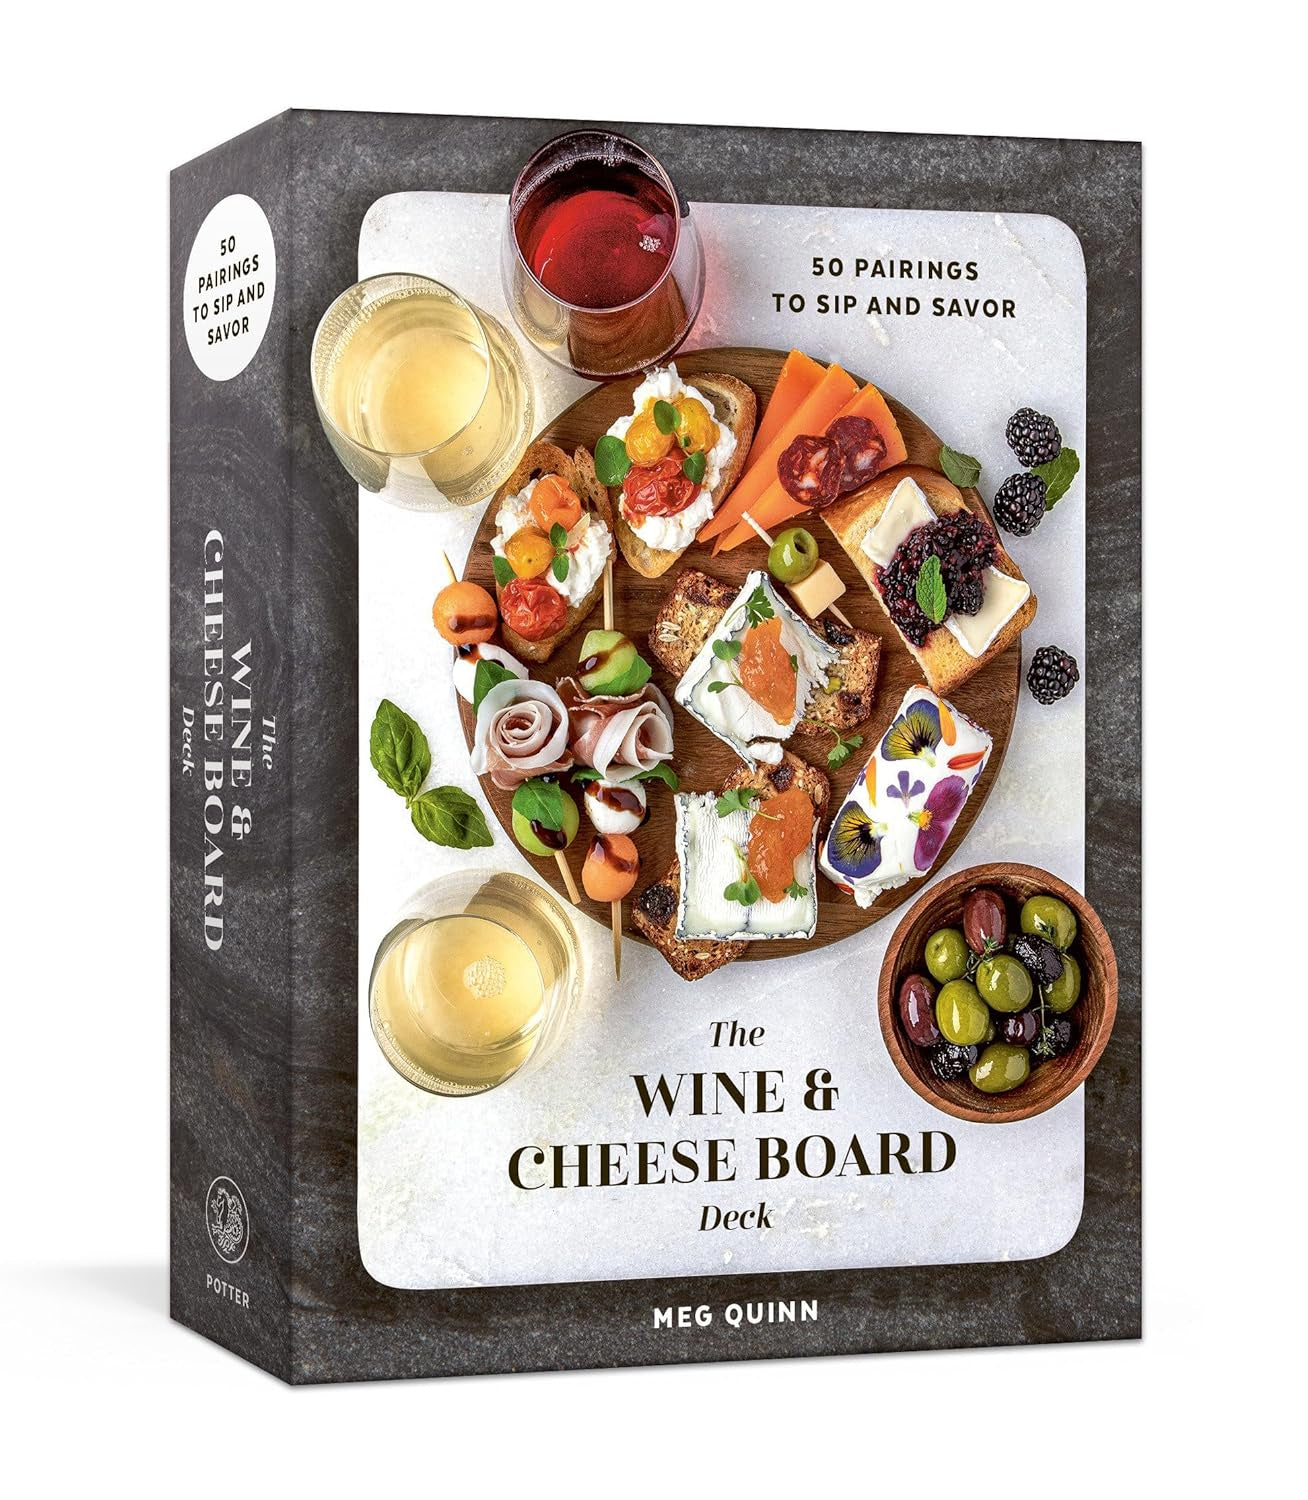 Photo of a book titled &quot;Wine &amp; Cheese Board Deck&quot; by Random House, displaying various cheese boards with wine glasses, arranged around the book&#39;s cover, highlighting wines under $25 and their pairings.